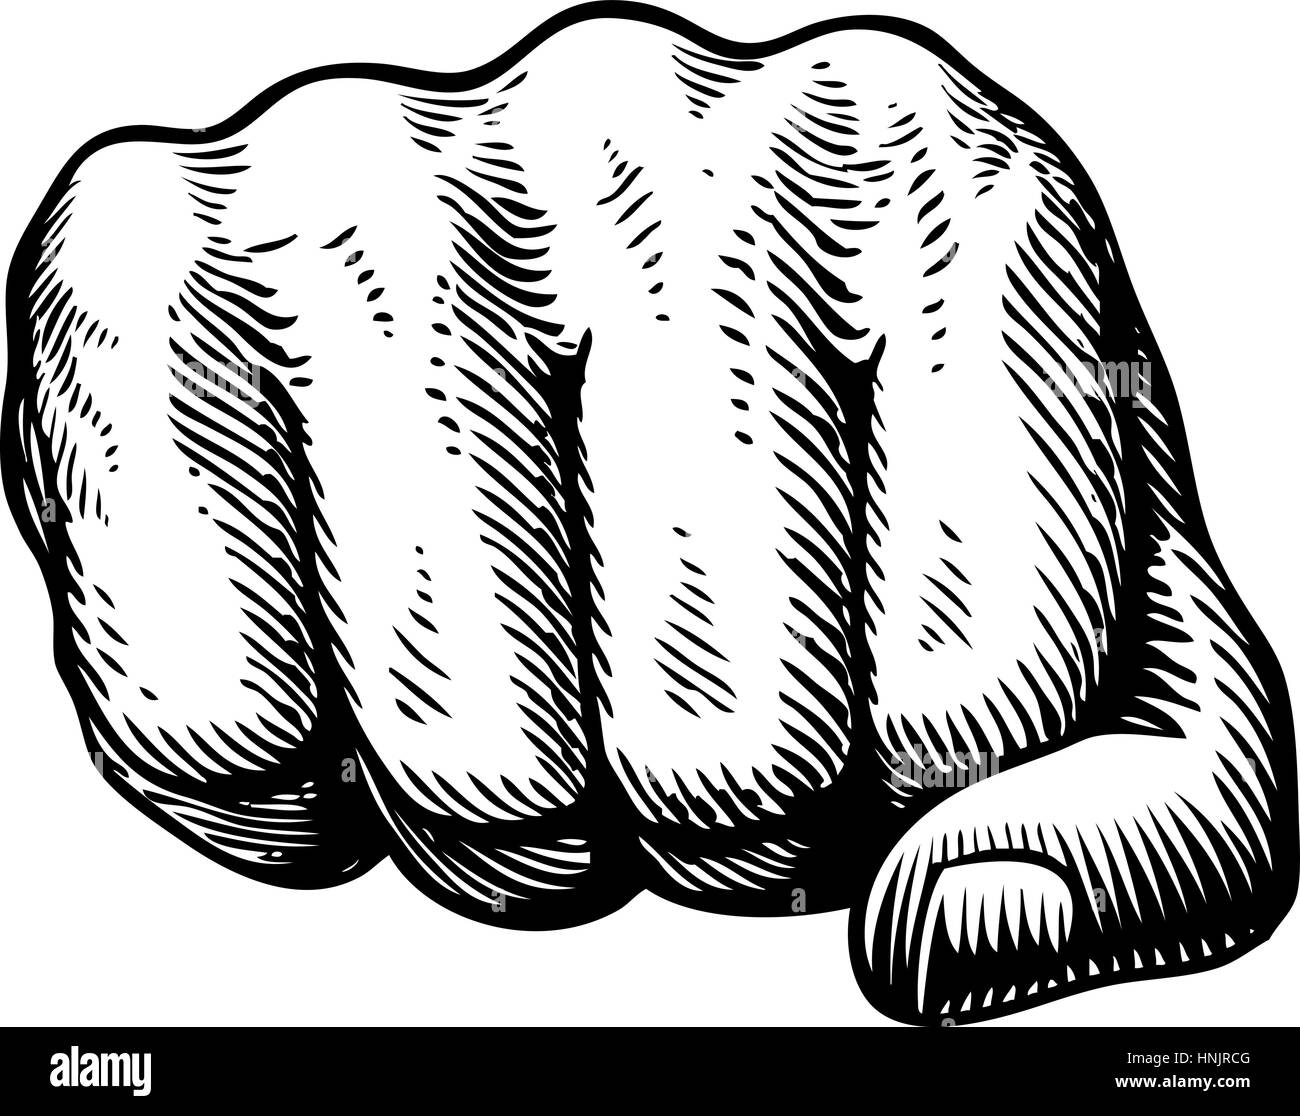 Fist, hand gesture sketch. Punch symbol. Vector illustration isolated on white background Stock Vector